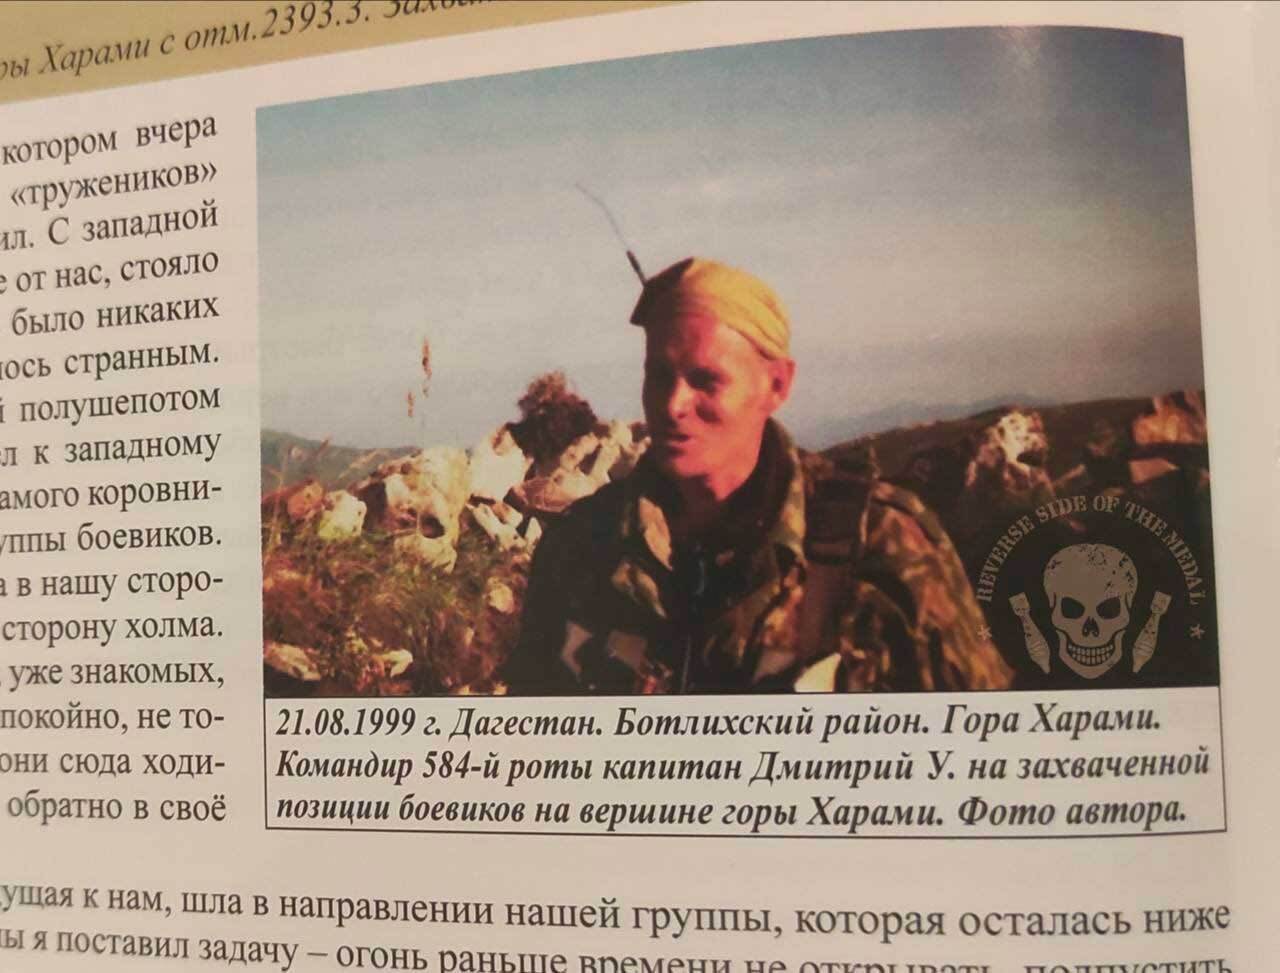 Dmitry Utkin In August 1999, Utkin (with the rank of captain) was in the press